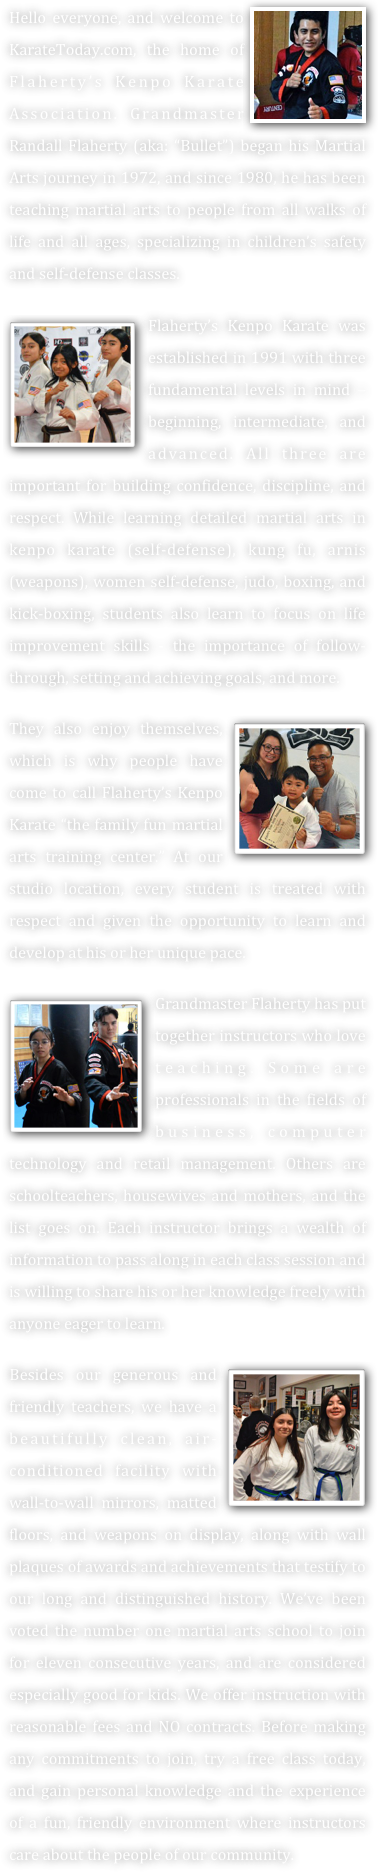 Low Starter Rates
     



Consider Us...

 Terrific Prices
 Great for Children 
    (ages: 5 & Up)
 Classes for Teens & Adults
 No Contracts
 Free Starter Uniform
 Up to One Free Month
 Over 40 years Experience
 Grandmaster Instruction
 Ultimate in Self-defense
 Friendly Environment
 Knowledgeable Teachers
 Excellent Student Mentors
 Certified in Child Psychology.
 Certified in CPR, Adult First Aid, AED, and Pediatrics.
 Martial Arts Hall of Fame inductees (A-List Recipients).







2015 KCRA 3 A-List Reports:
“Voters Love
Flaherty’s Kenpo Karate.”

Ranked in the top “5” Schools out of 106 for Best Martial Arts.

 Best of San Joaquin
 Best of the Bay
 Parent Magazine
   (Voted Us: Good for kids)








 On Saturday, June 29, 2019, Grandmaster Flaherty was selected as one of five martial artists to represent the entire state of California as an inducted member of the American Martial Arts Alliance, Who’s Really Who in the Martial Arts, and as one of the authors of the Masters and Pioneers Autobiography book.






On Saturday, January 25, 2020 Grandmaster Randall Flaherty was inducted into the Action Martial Arts Magazine Hall of Honors. He was one of only five people worldwide chosen to receive the “Distinguished Renowned Martial Artist” award. He was also selected to author a brief autobiography for the 2020 Martial Arts History Book/Directory.

 The Academy received Best of 2021: Stockton Awards (Business Hall of Fame) for 10 consecutive years. (Martial Arts Training)

Thank You
For Voting Us #1